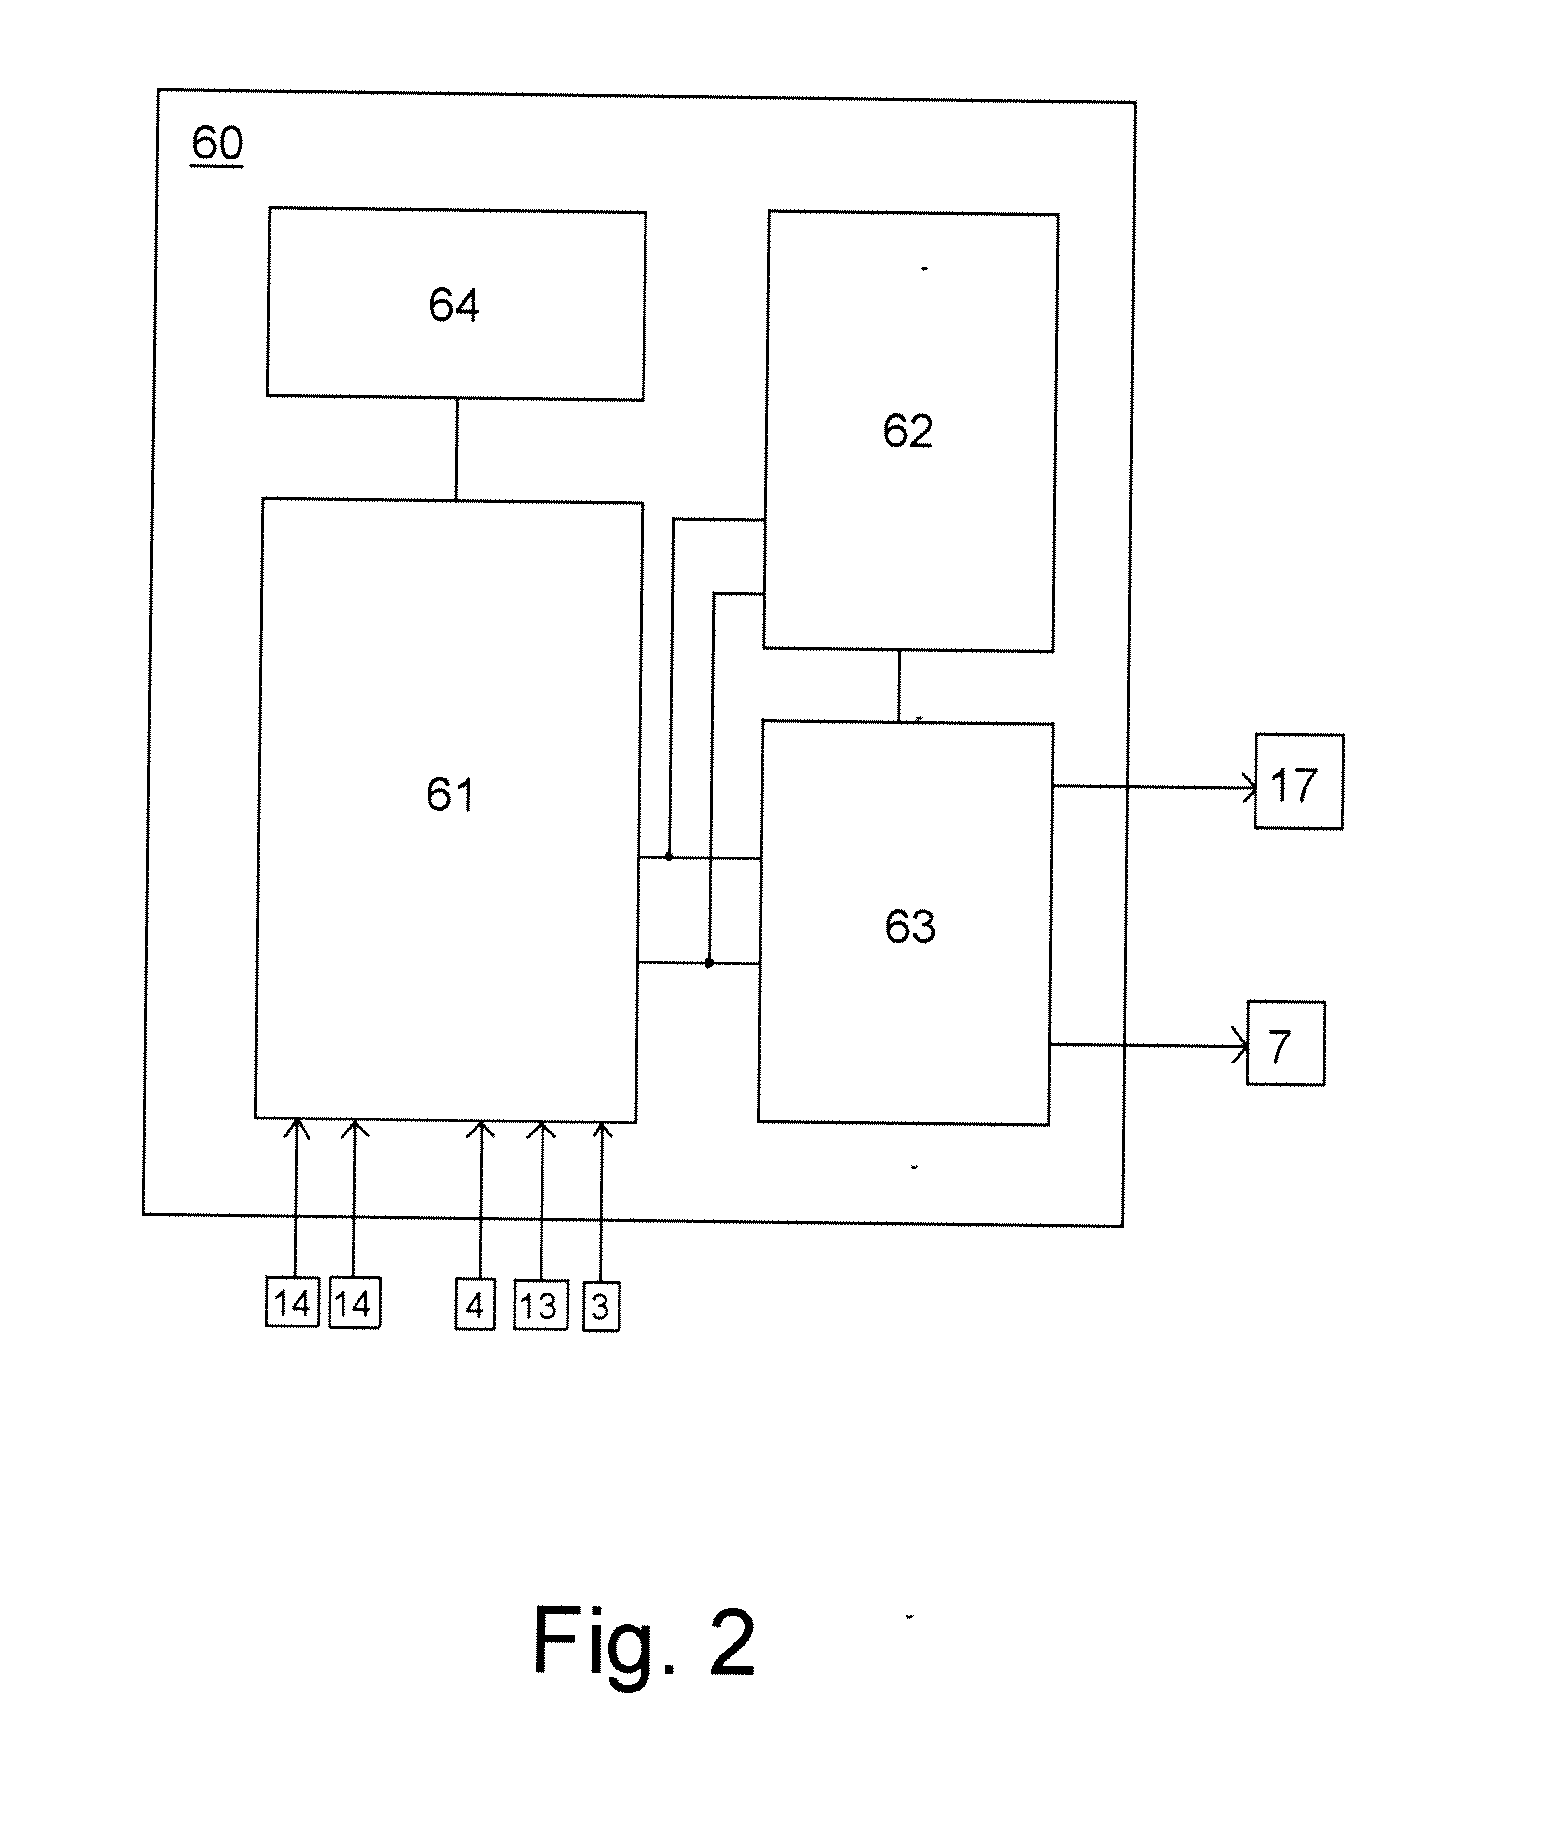 Method of determining rotary angle related data of a vehicle wheel